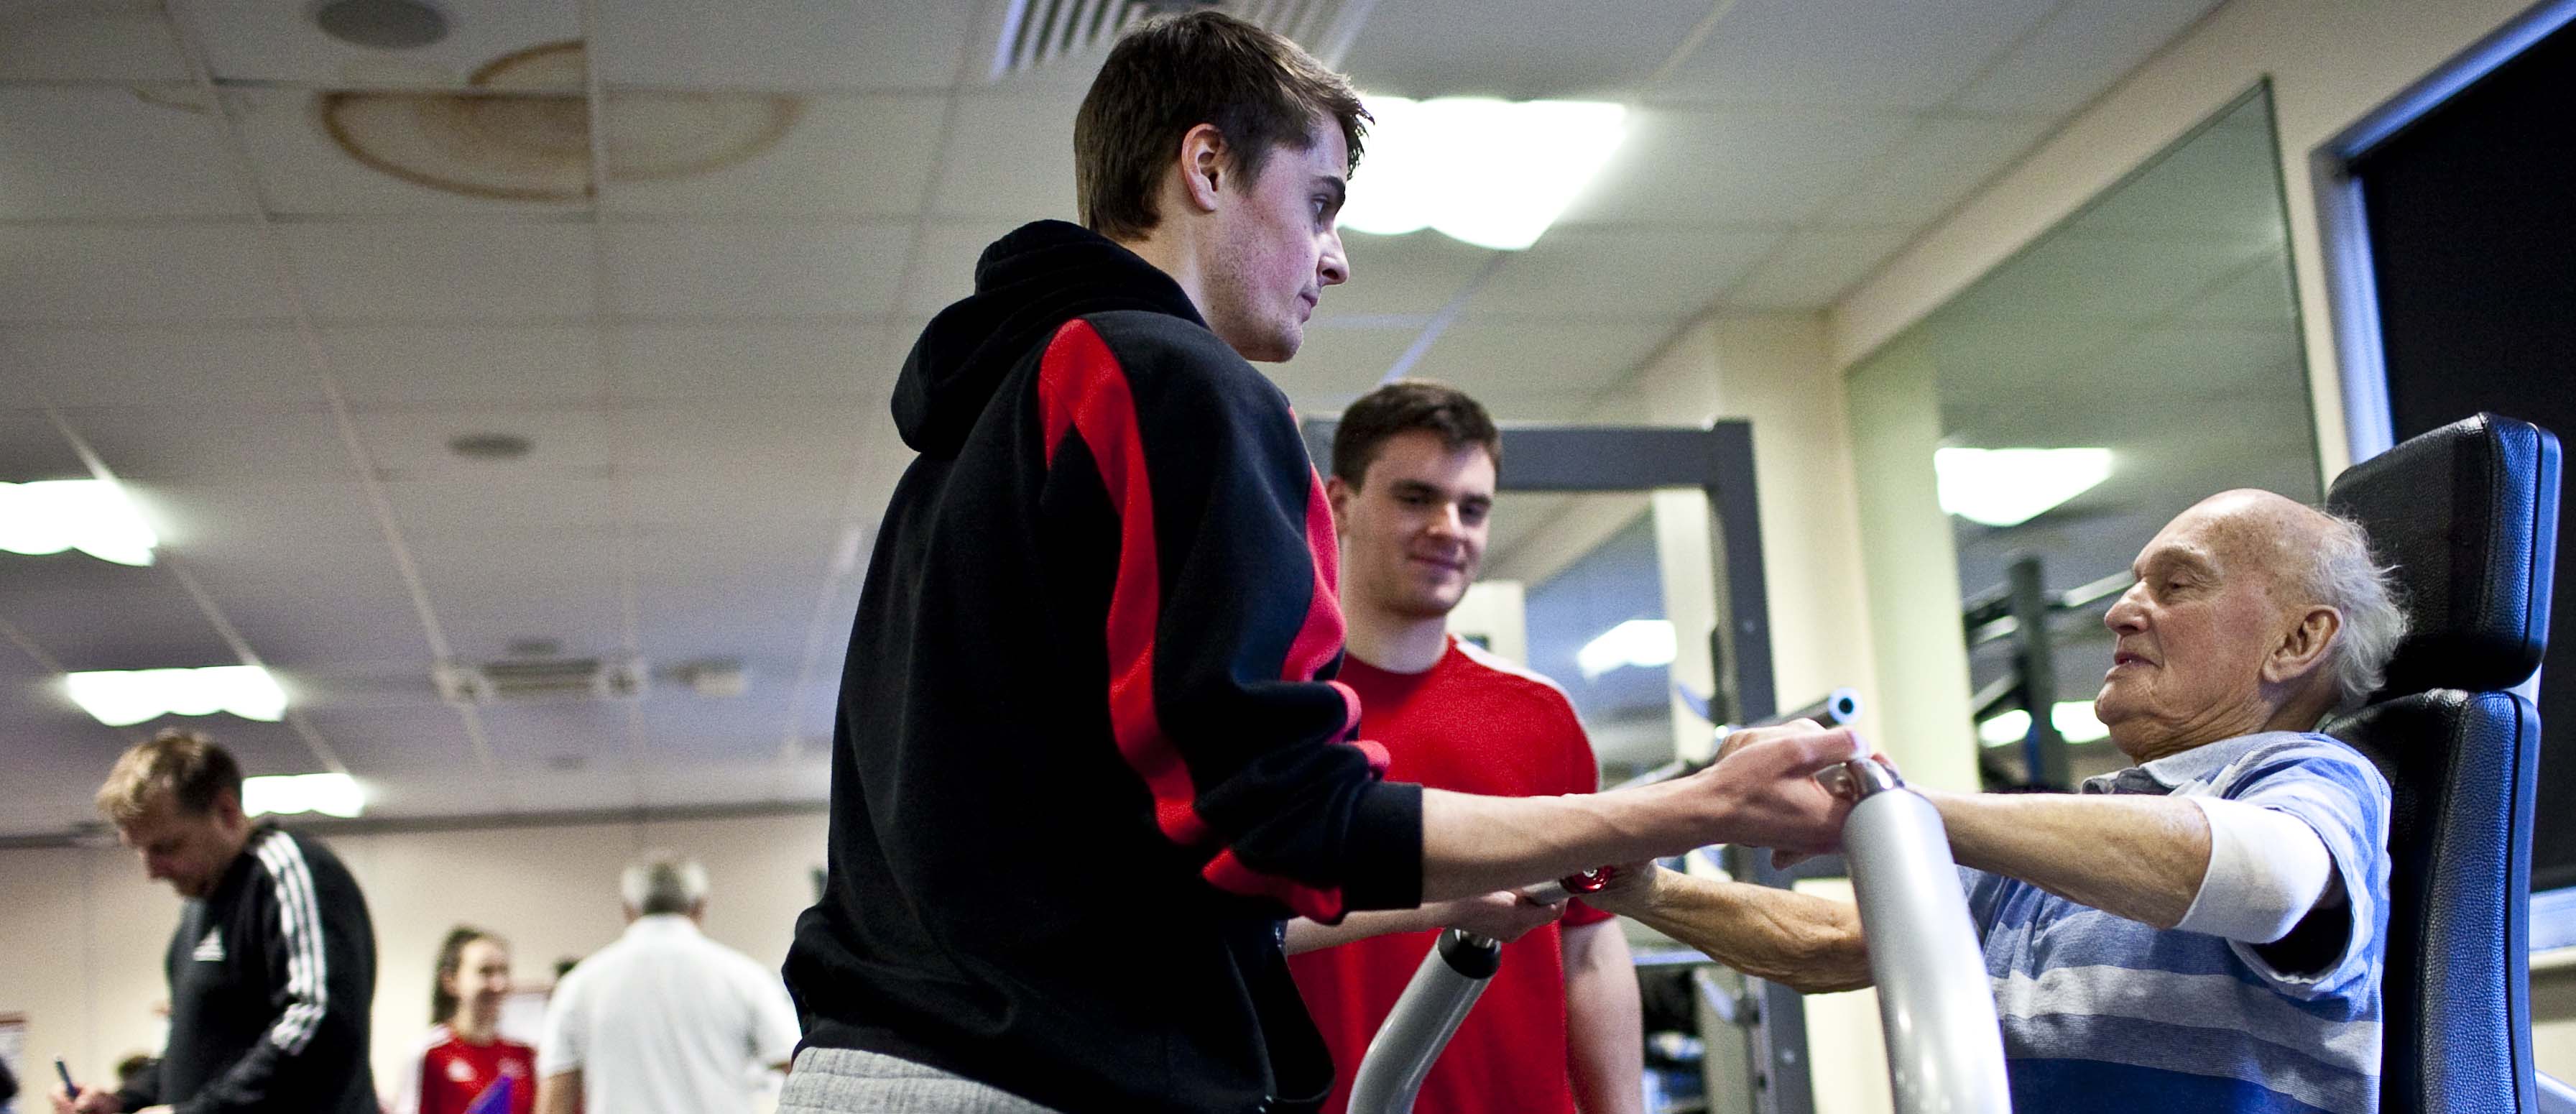 A Solent student working with a client in the teaching gym